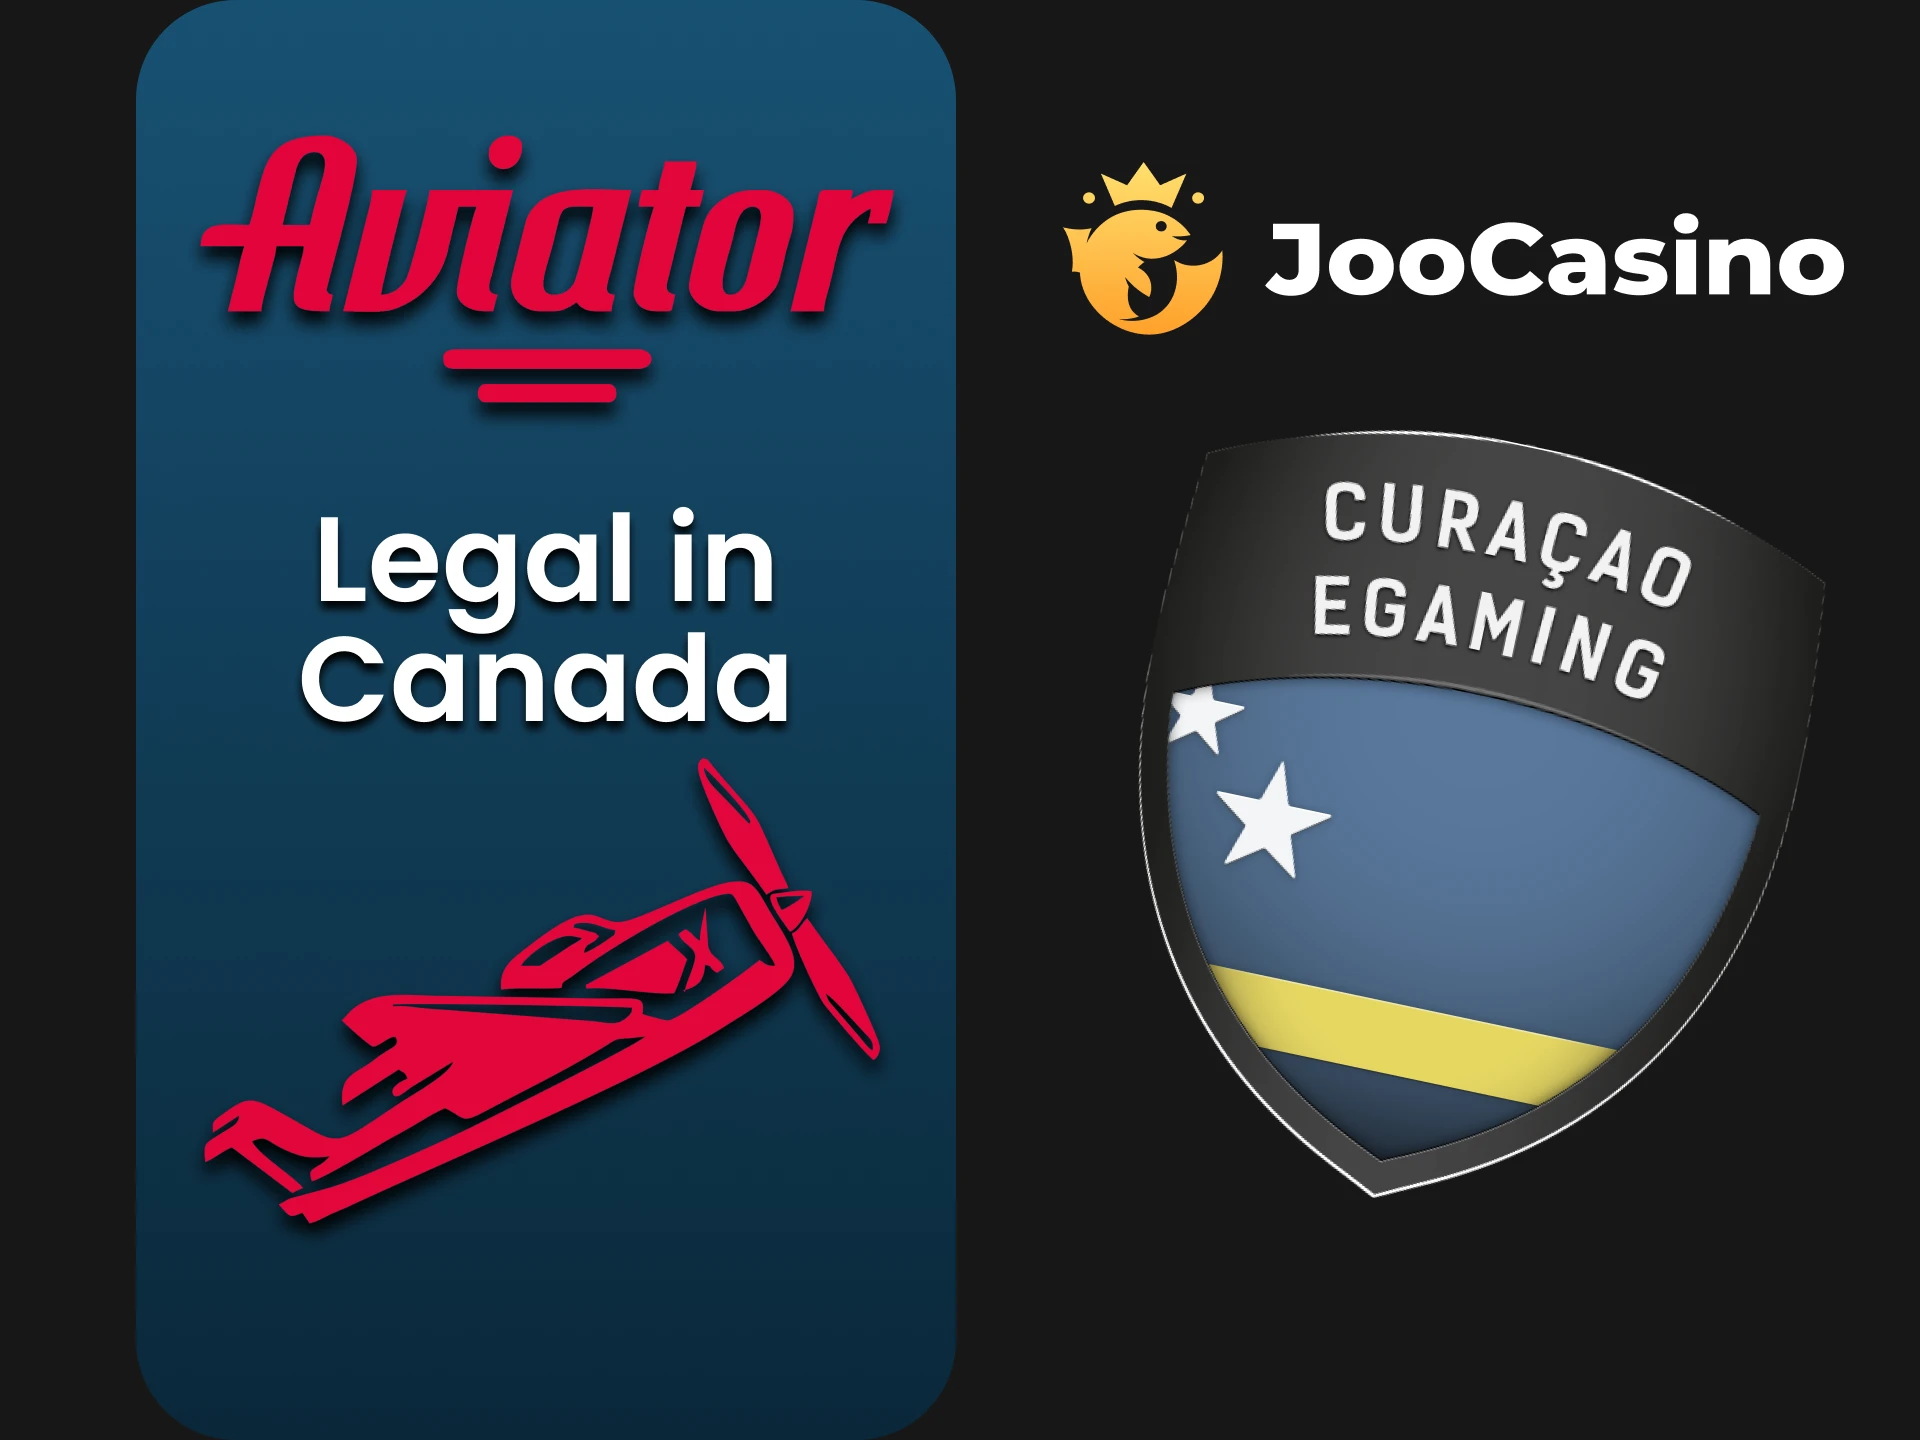 We will tell you about the license for the Aviator game at Joo Casino.